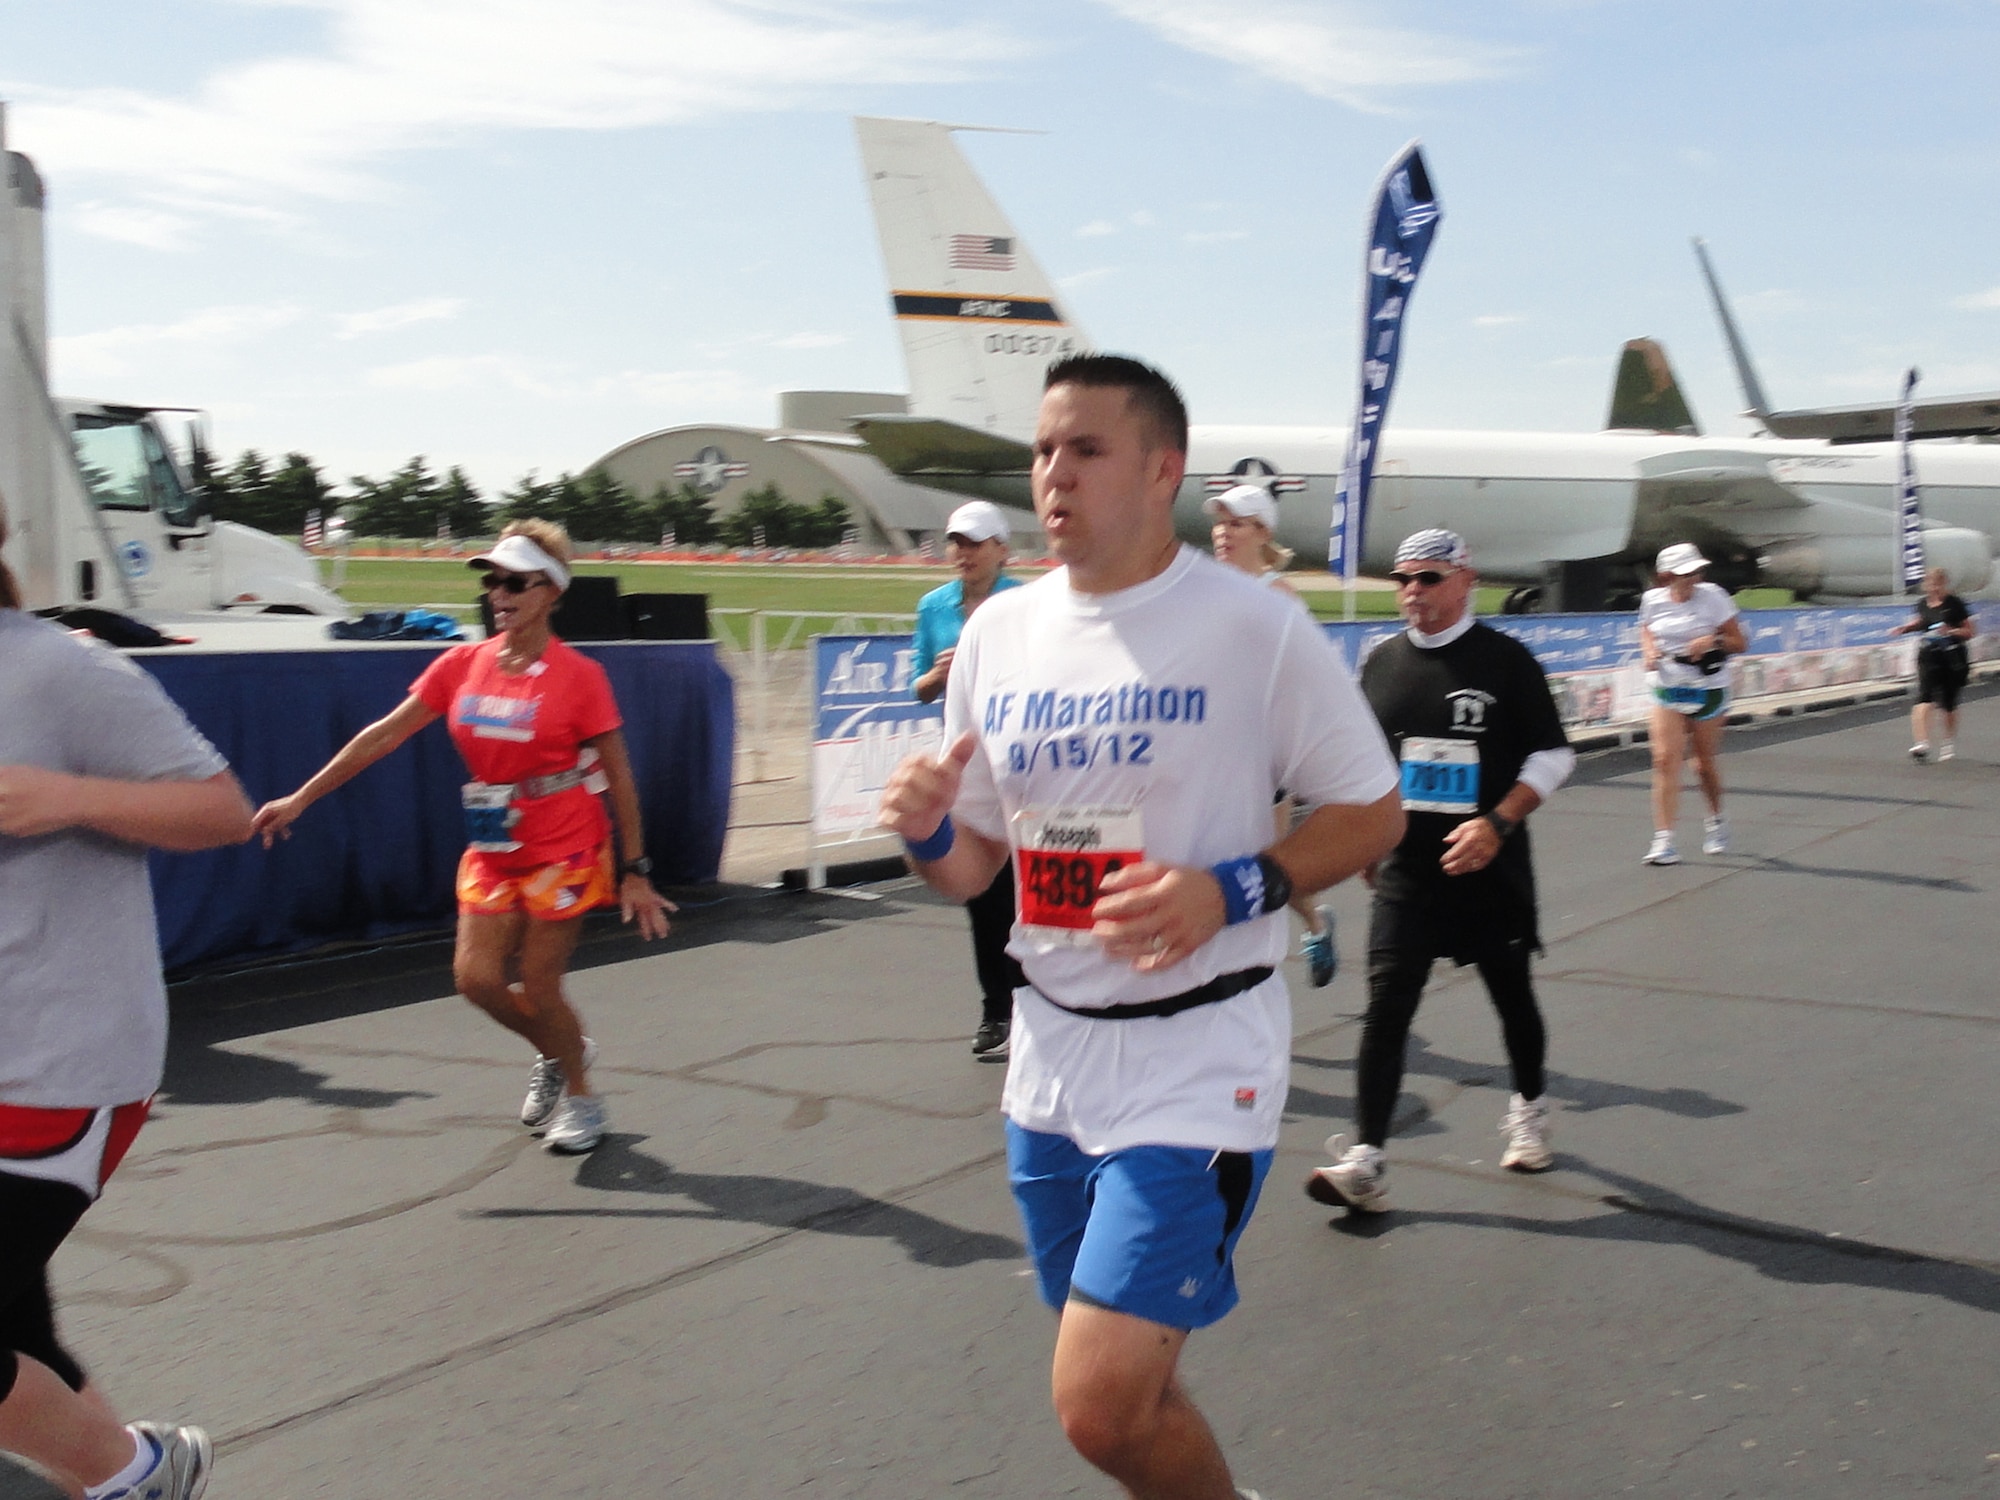 WRIGHT-PATTERSON AIR FORCE BASE, Ohio - Tech. Sgt. Joseph Valenzuela, 445th Aeromedical Evacuation Squadron, crosses the finish line of the 2012 Air Force Marathon in 4 hours, 15 minutes Sept. 15. This was his first full marathon. (Courtesy photo)